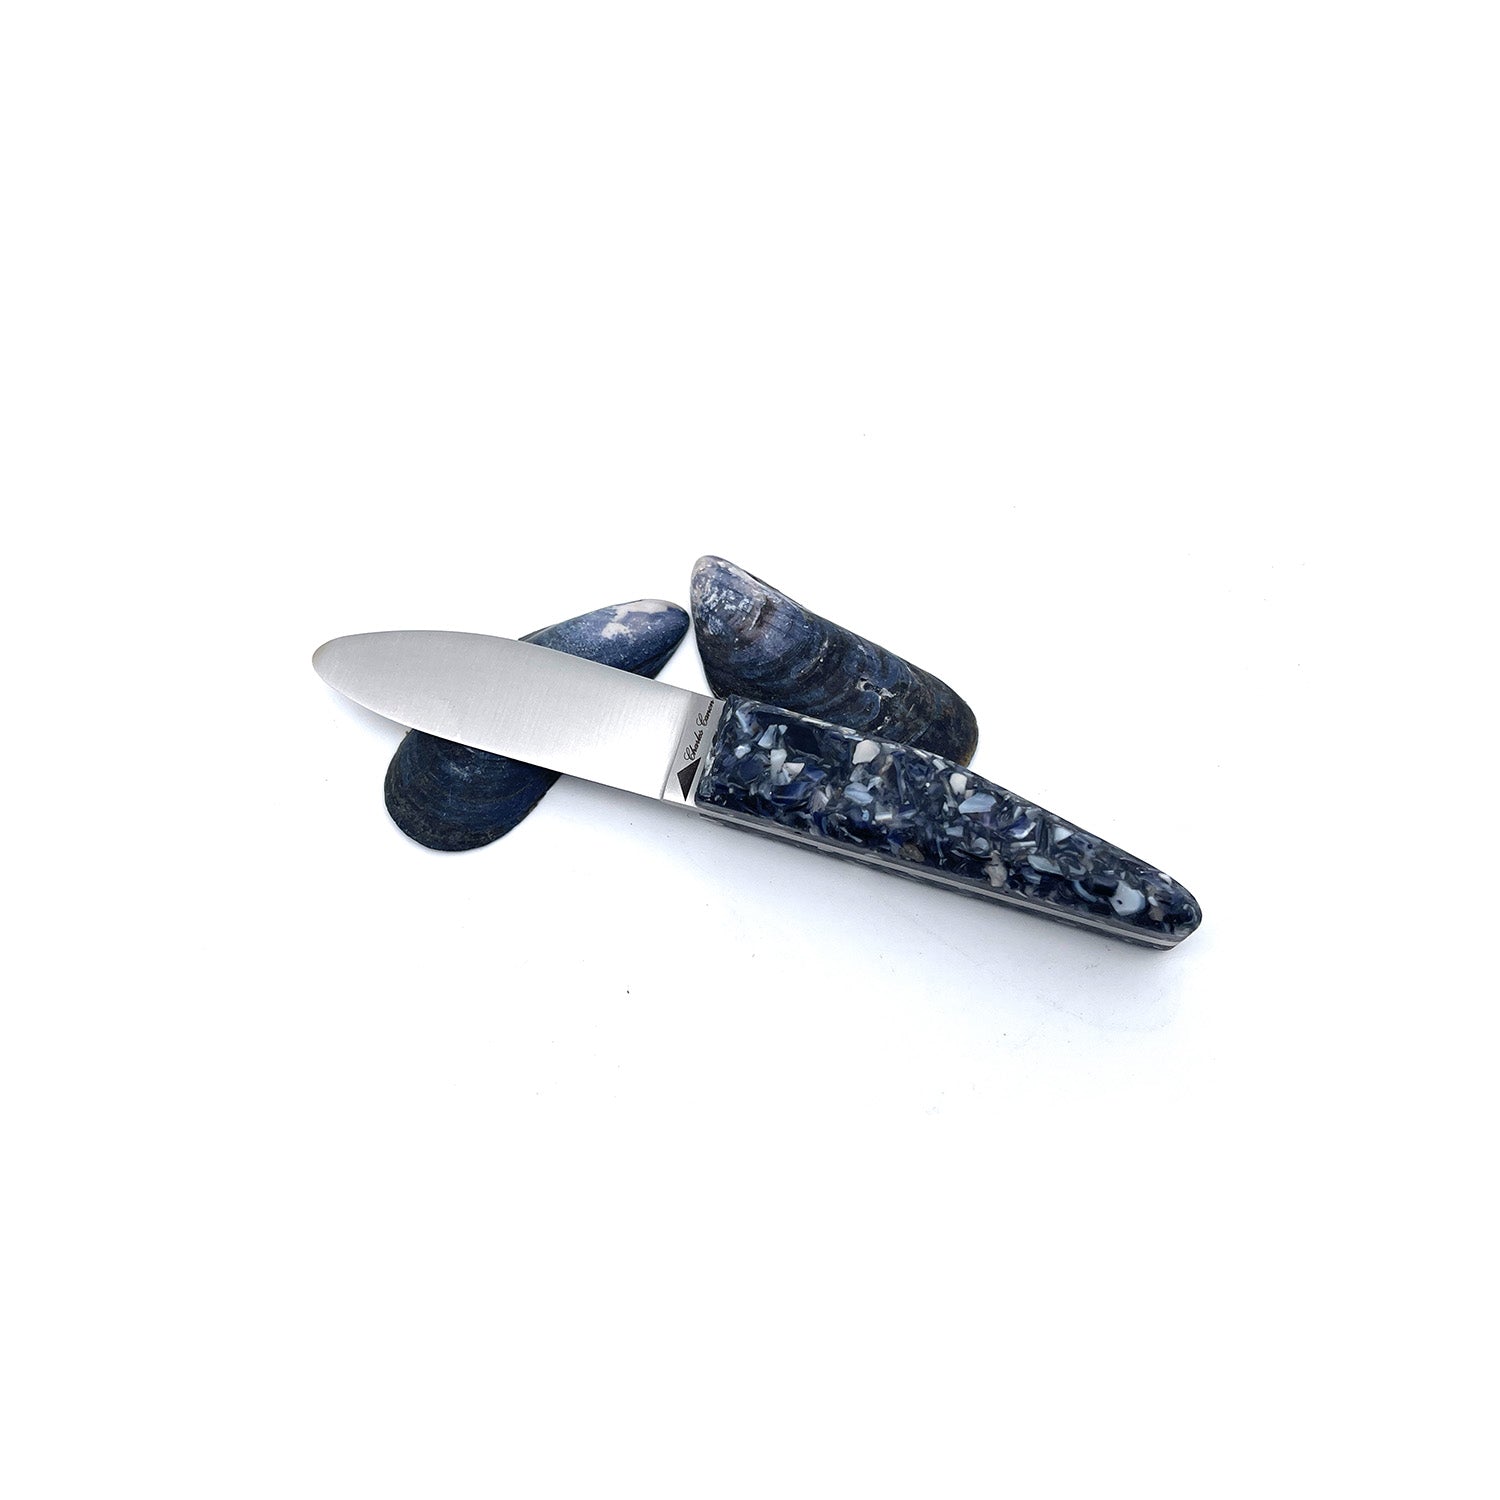 Children's knife with a handle made from recycled mussel shells